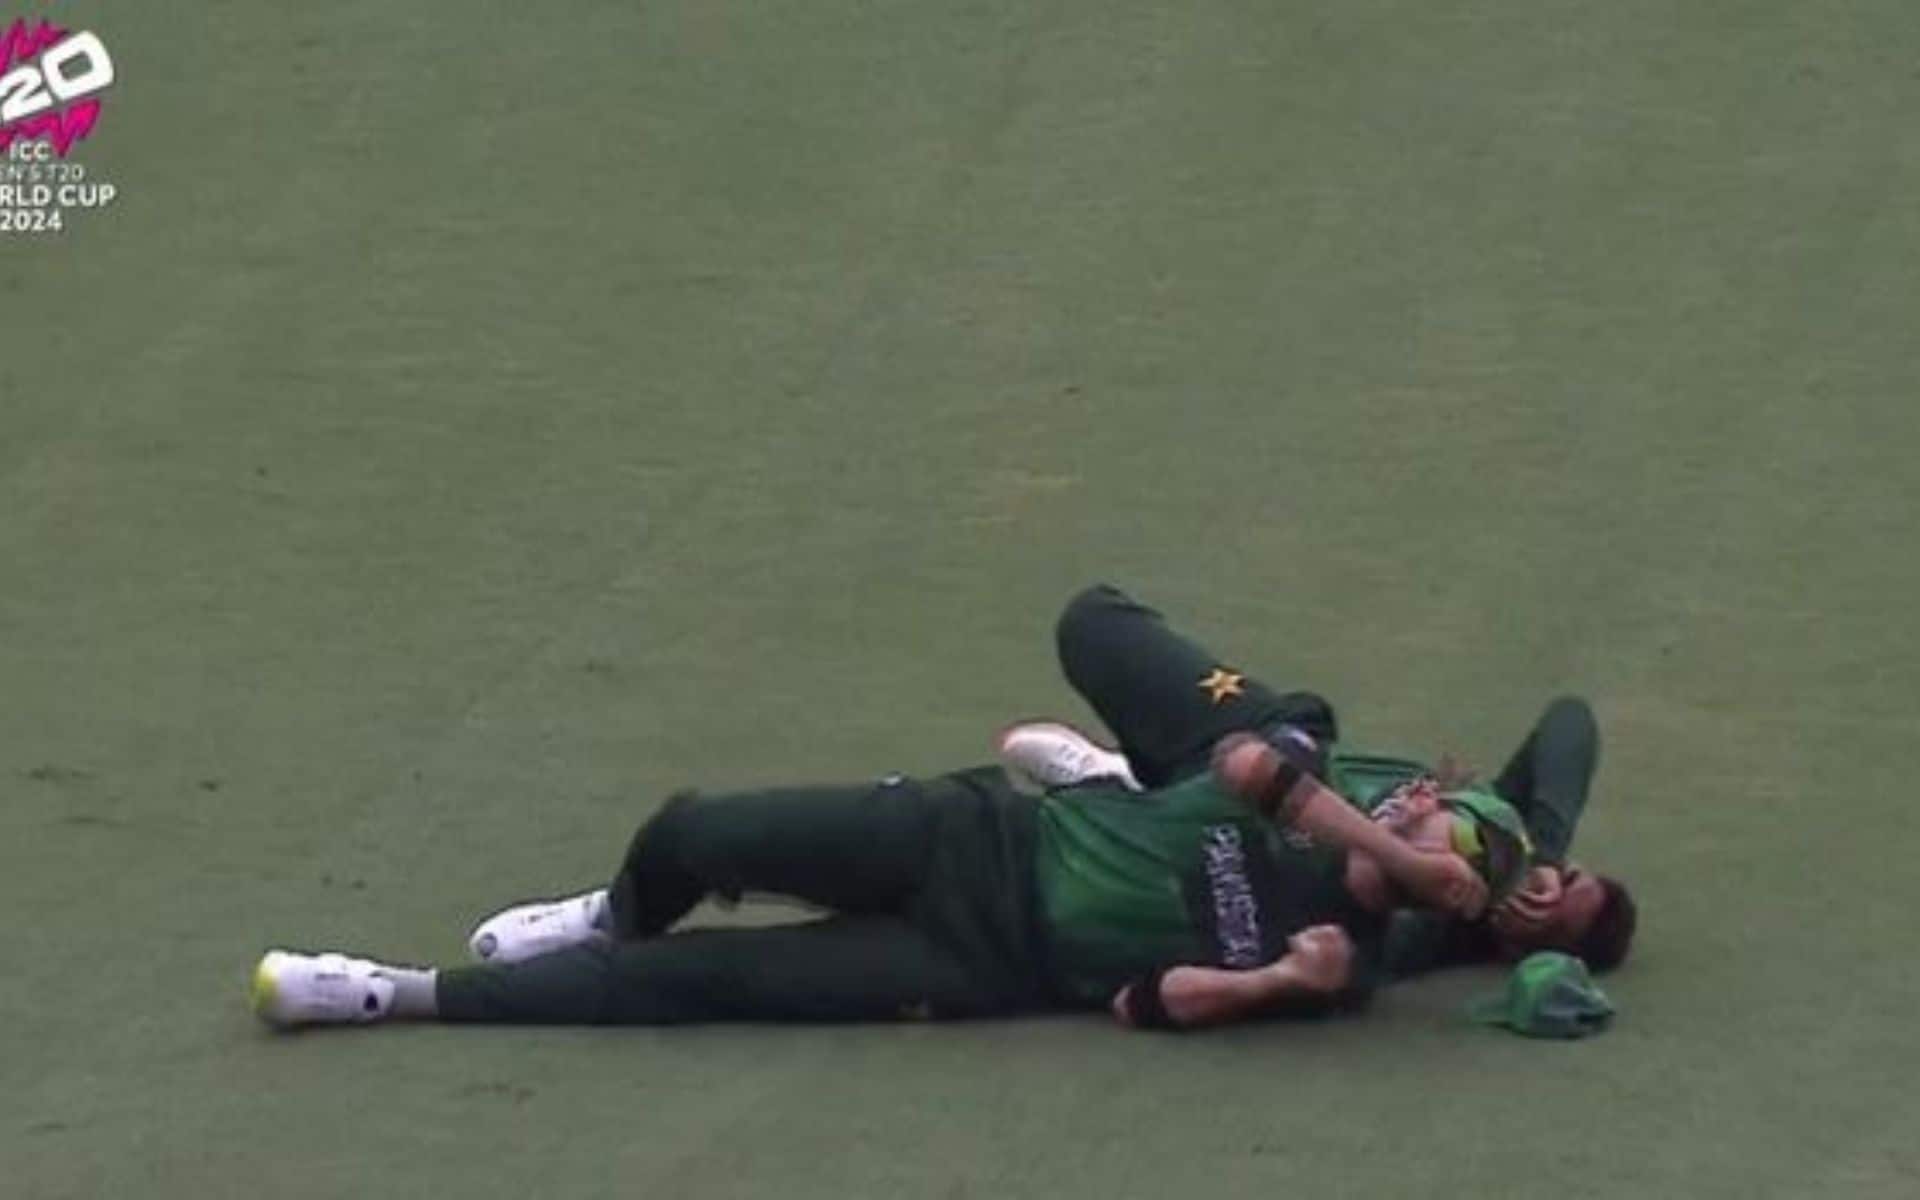 Shaheen Afridi, Usman Khan on the ground after colliding on field (X.com)